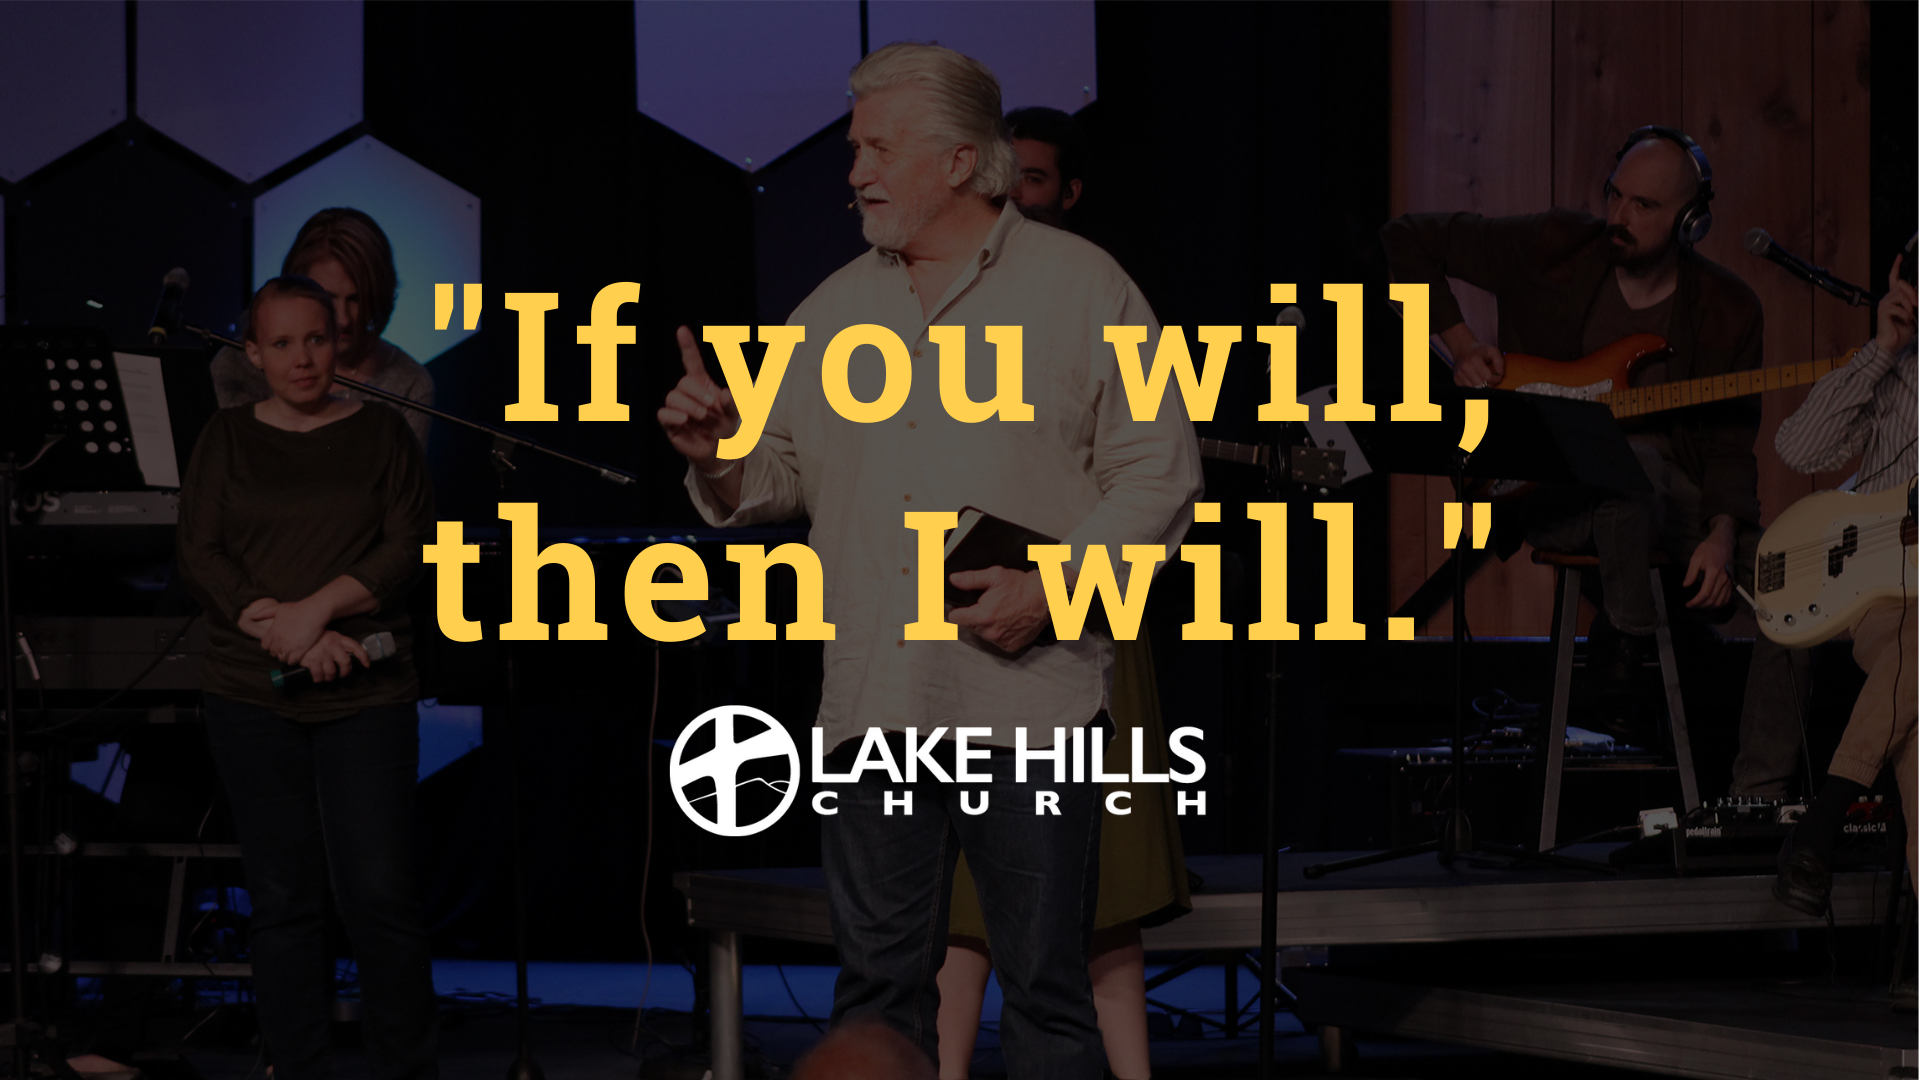 "If you will, then I will." -God